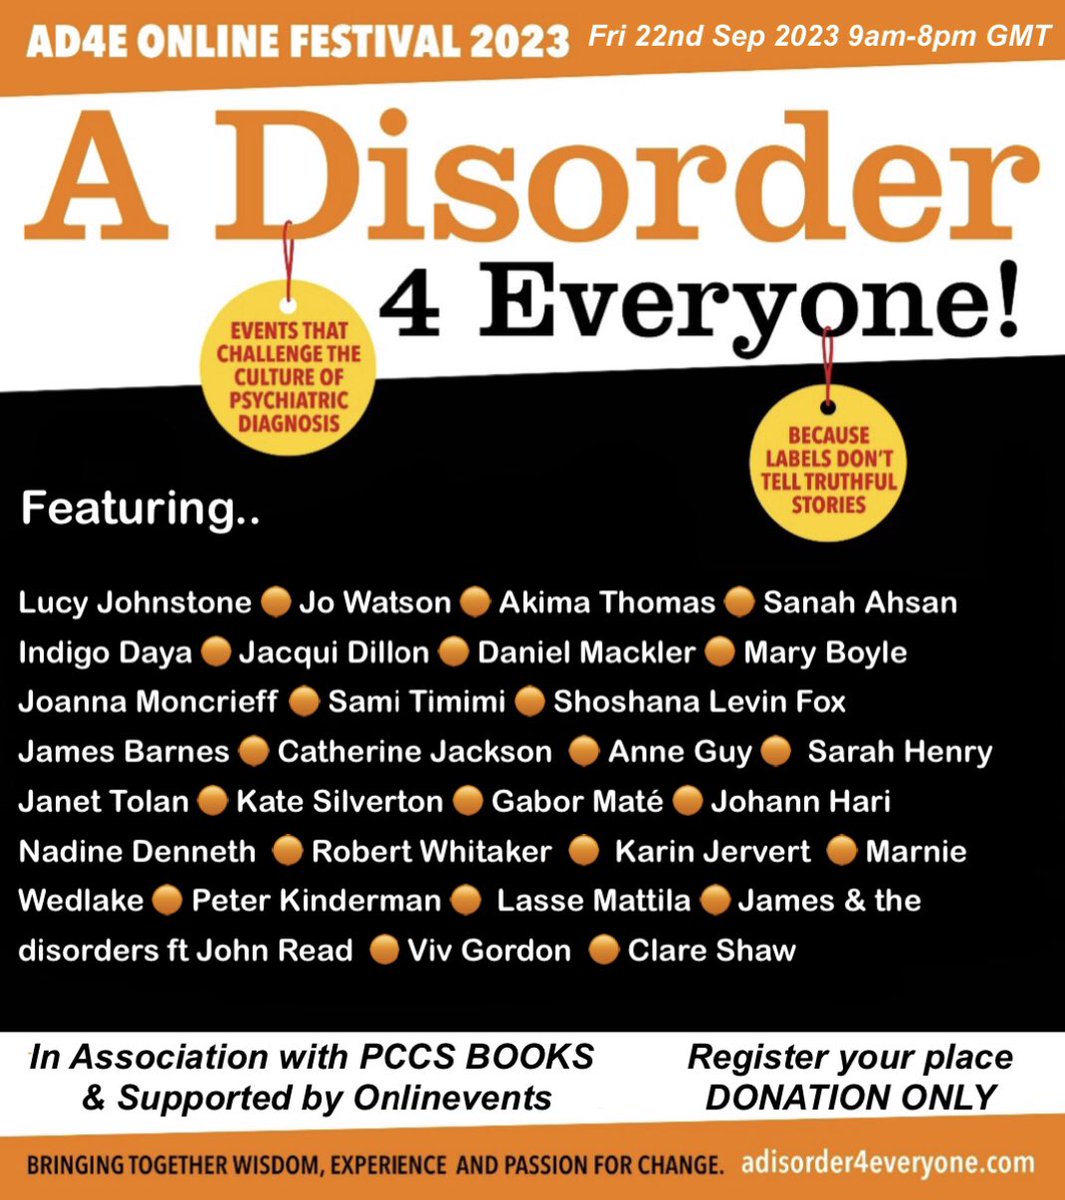 Announcing the #AD4Efestival23 contributors! Expect a day of dynamic, change-making energy that challenges the pathologising of emotional distress 22nd Sept Pls RT🧡 #adisorder4everyone bit.ly/3XkRVYn @pccsbooks @onlinevents @katesilverton @DrGaborMate @johannhari101